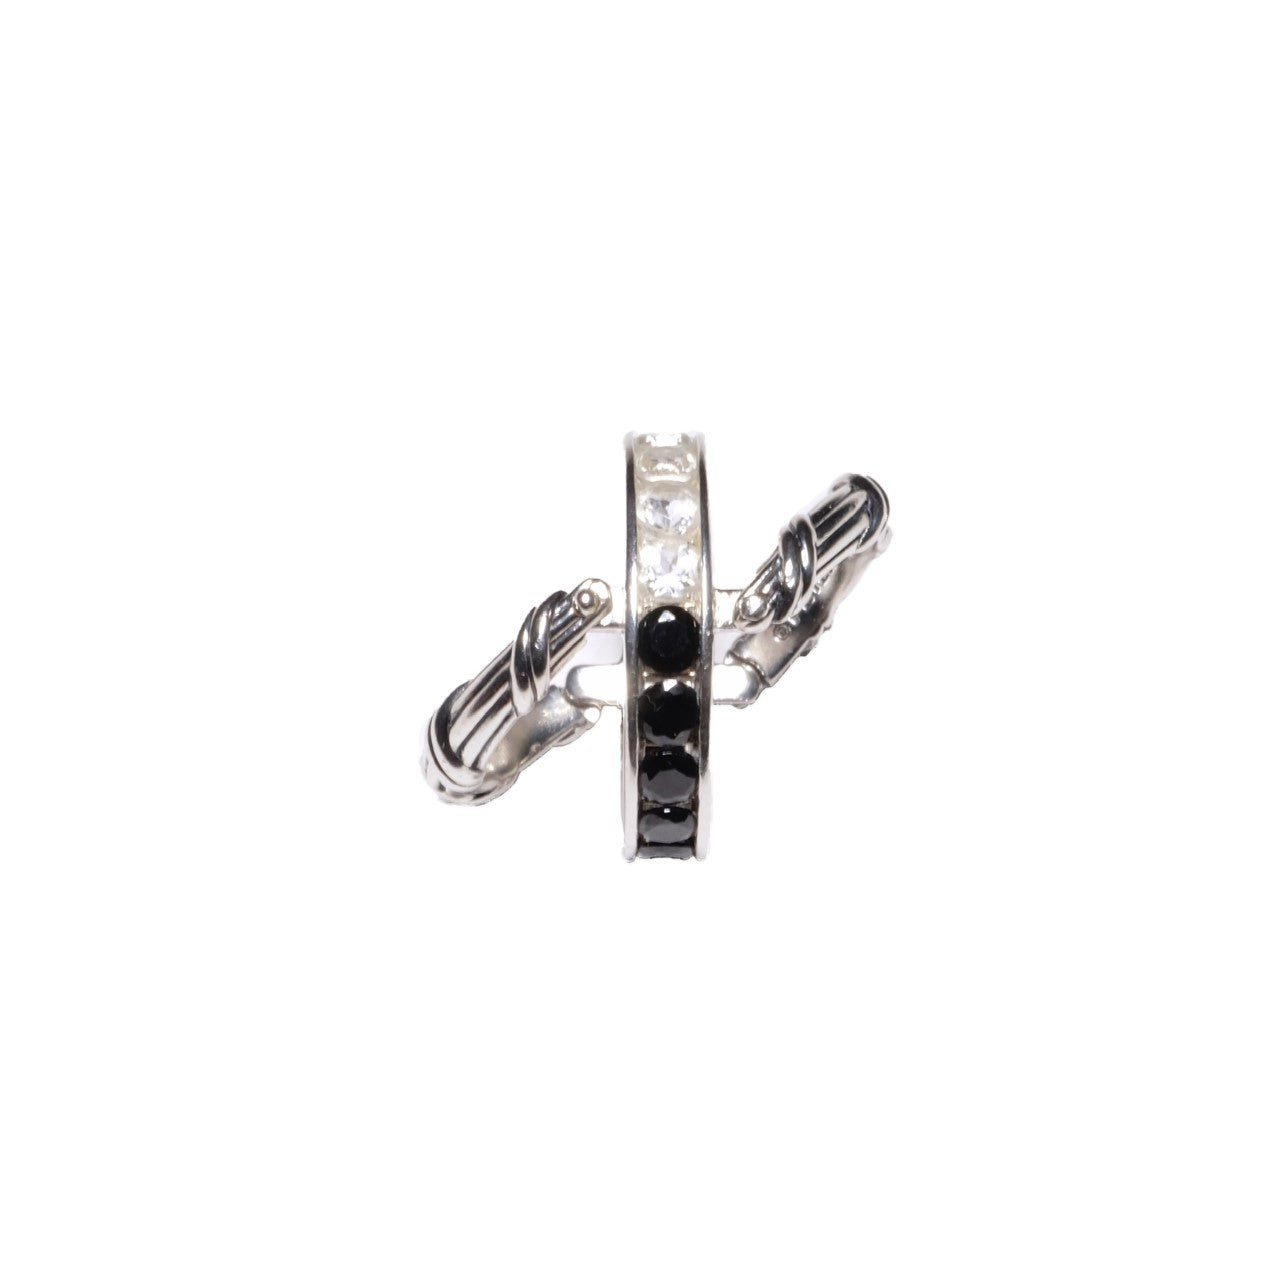 Signature Classic Reversible Ring with white topaz and black spinel in sterling silver